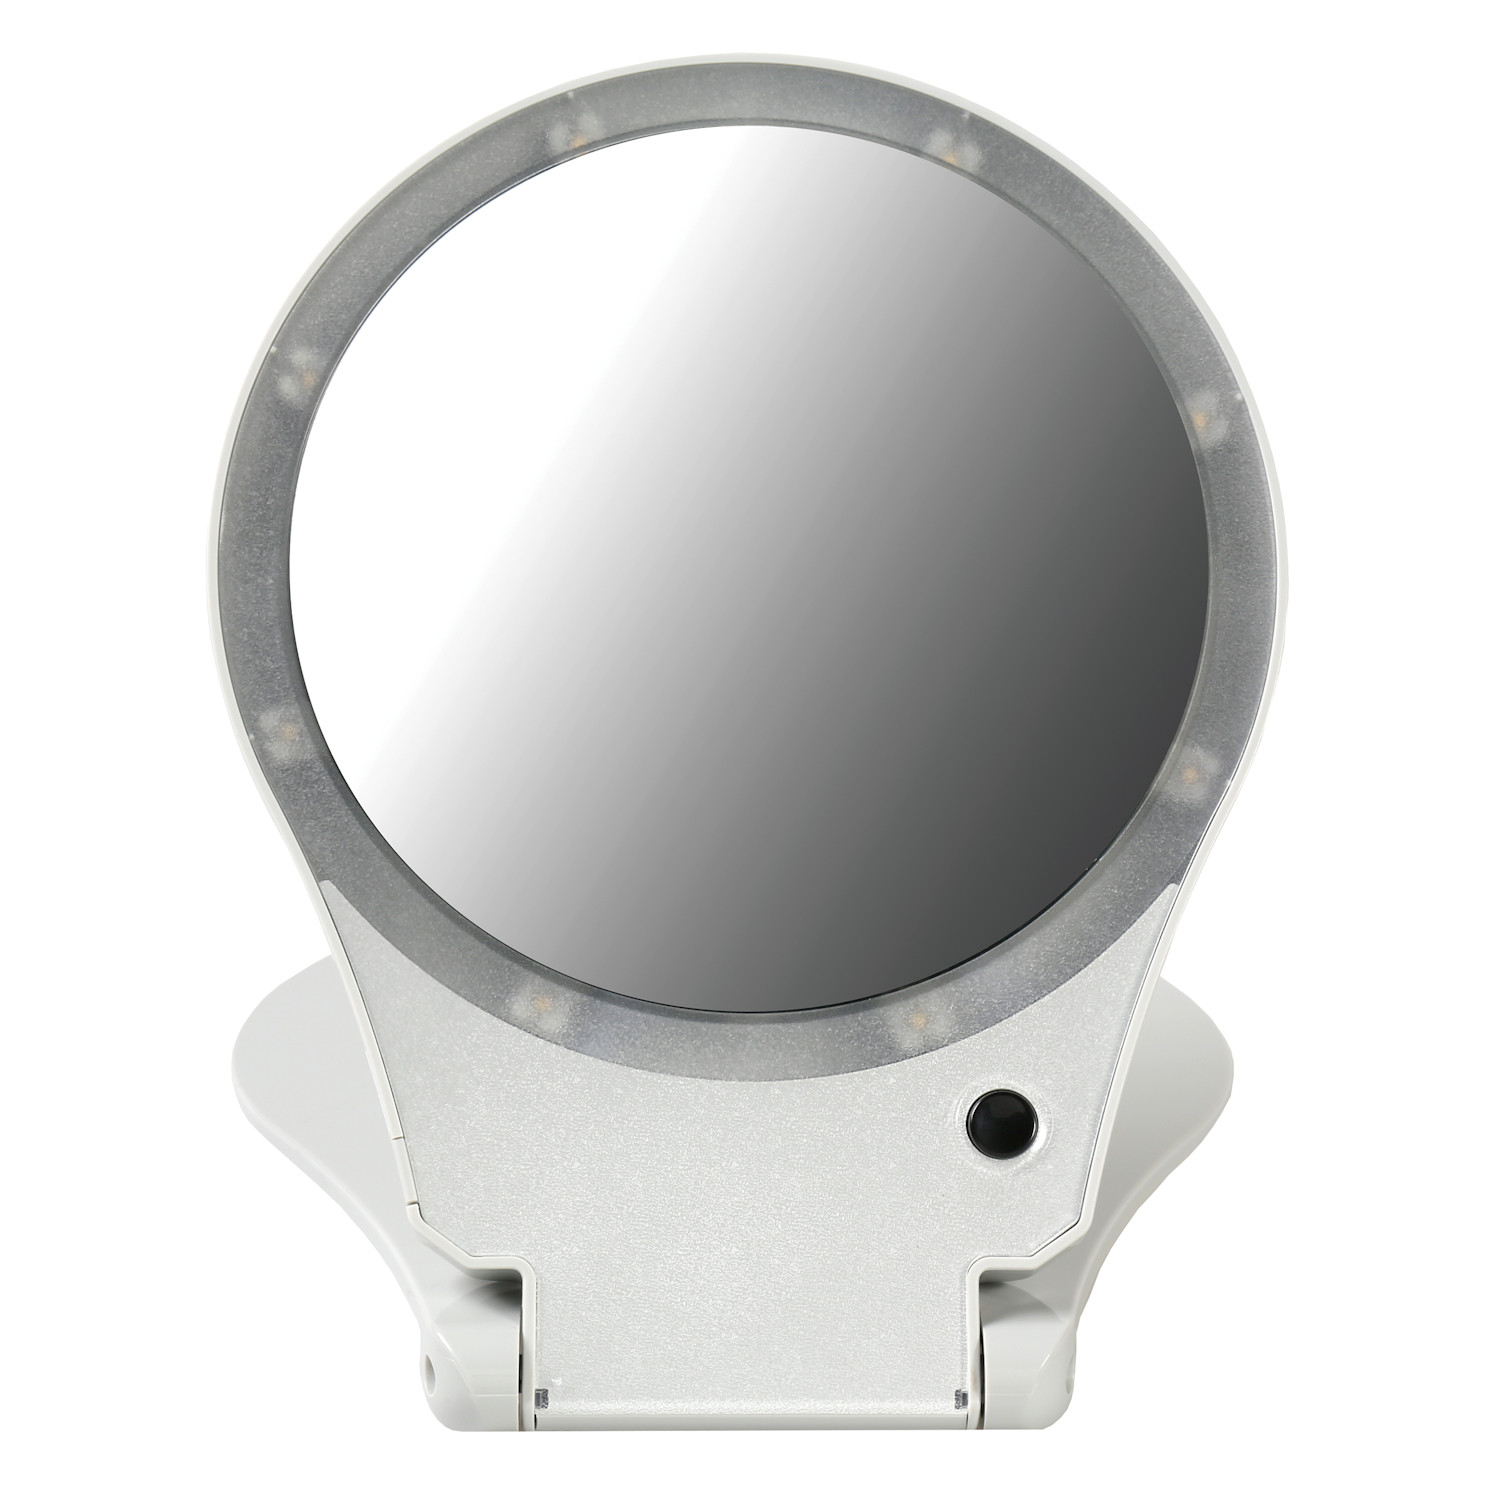 travel mirror x10 magnification